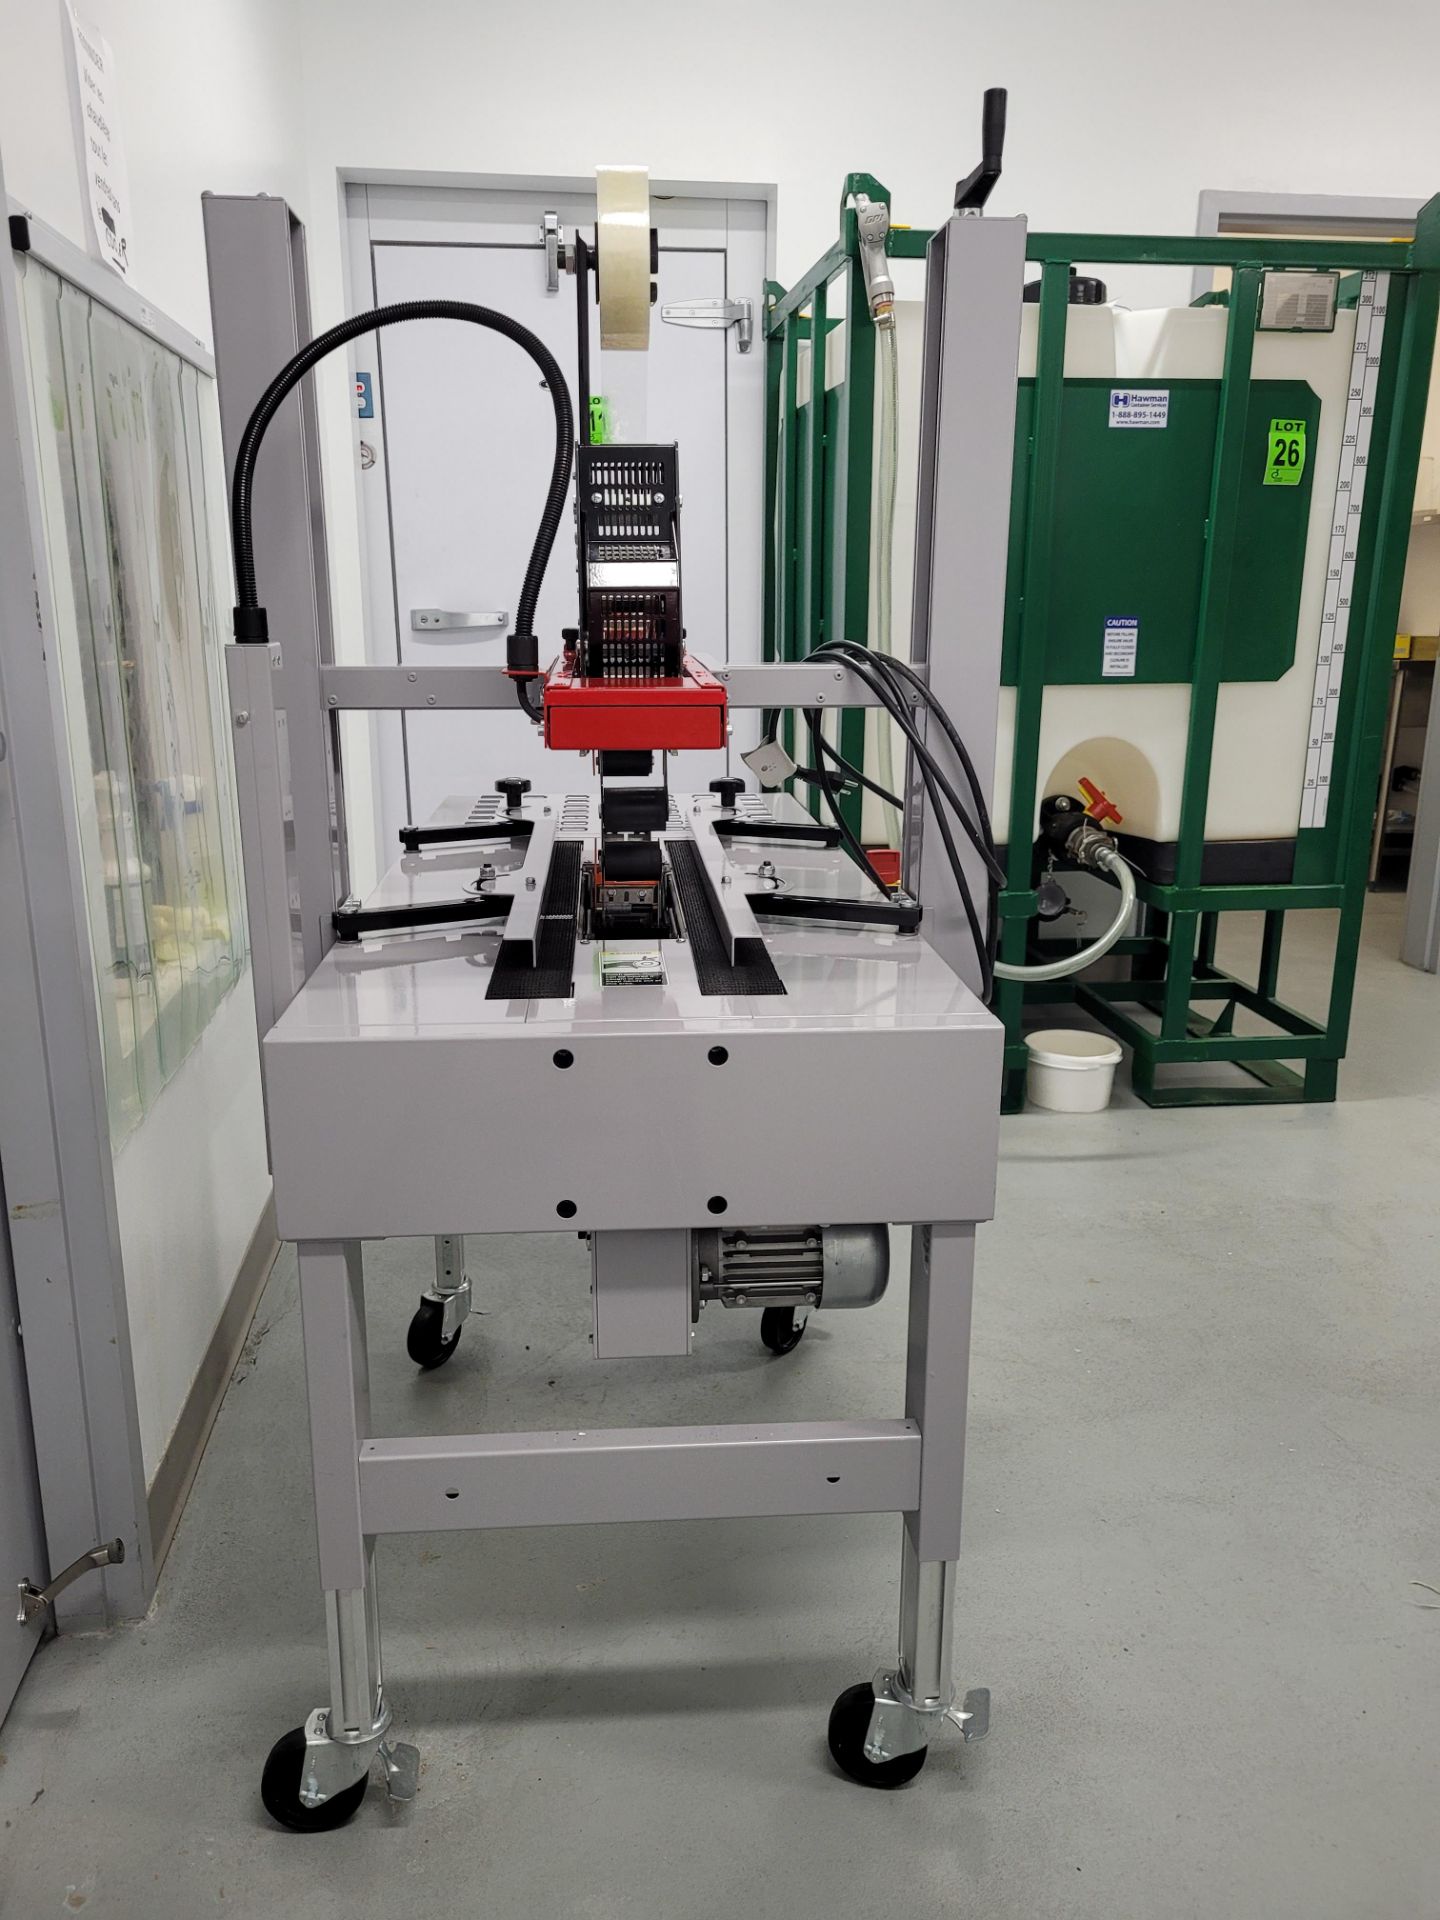 2019 3M Case Sealing System mod. A20 - Image 9 of 10